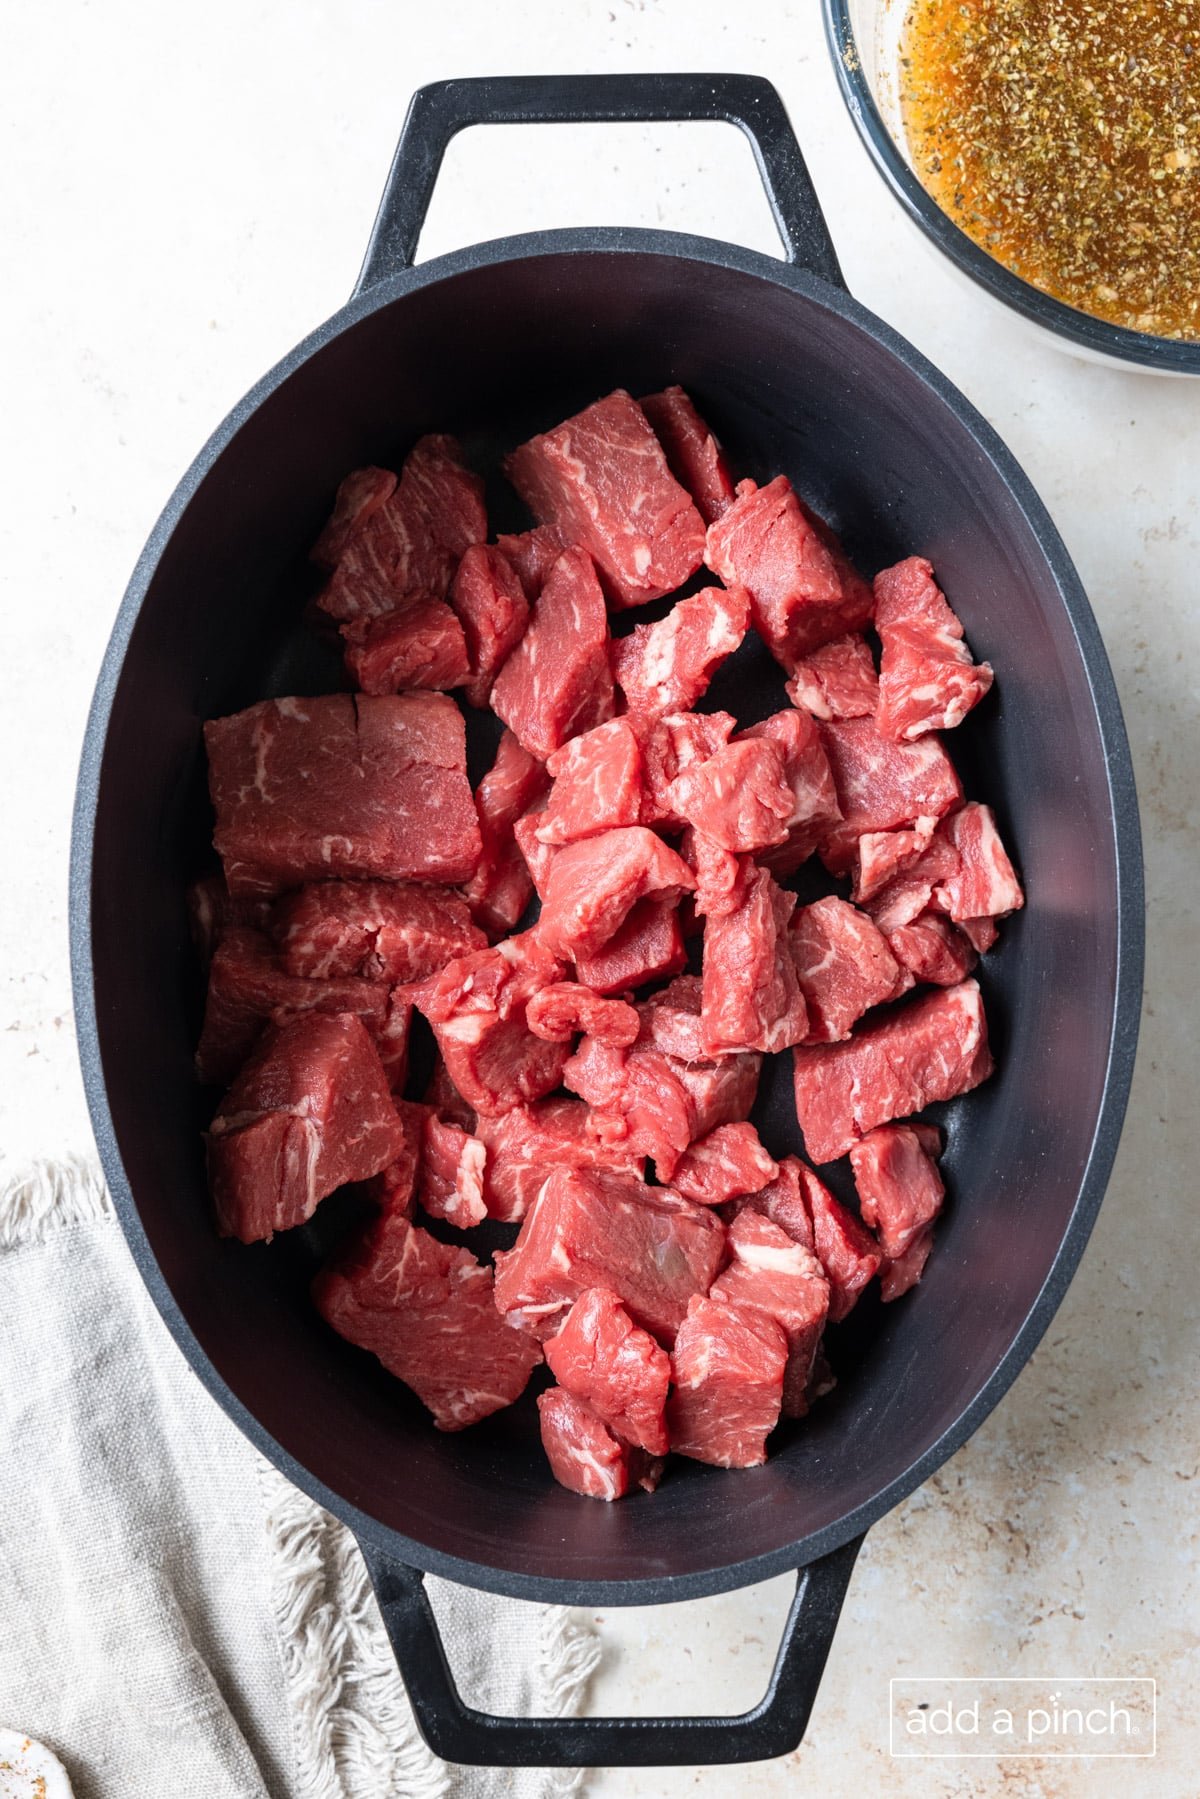 Photograph of beef ready to be cooked.